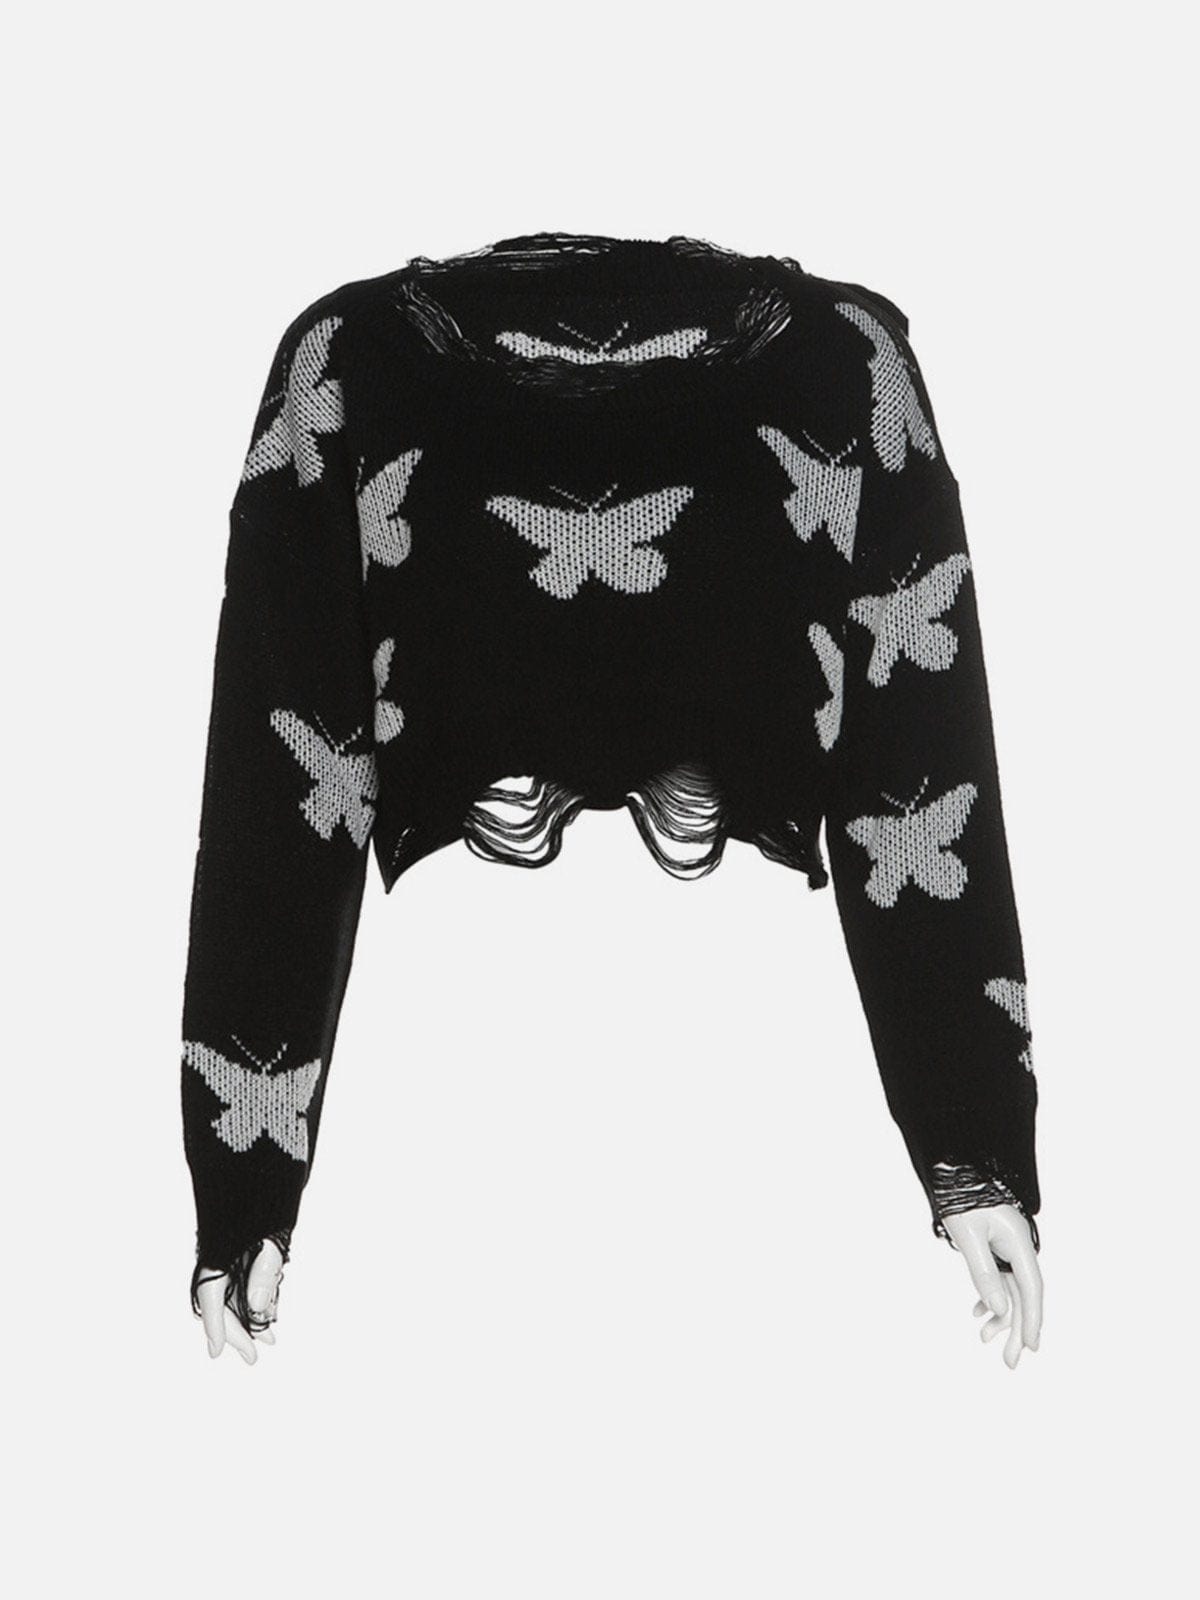 NEV Butterfly Jacquard Distressed Crop Top